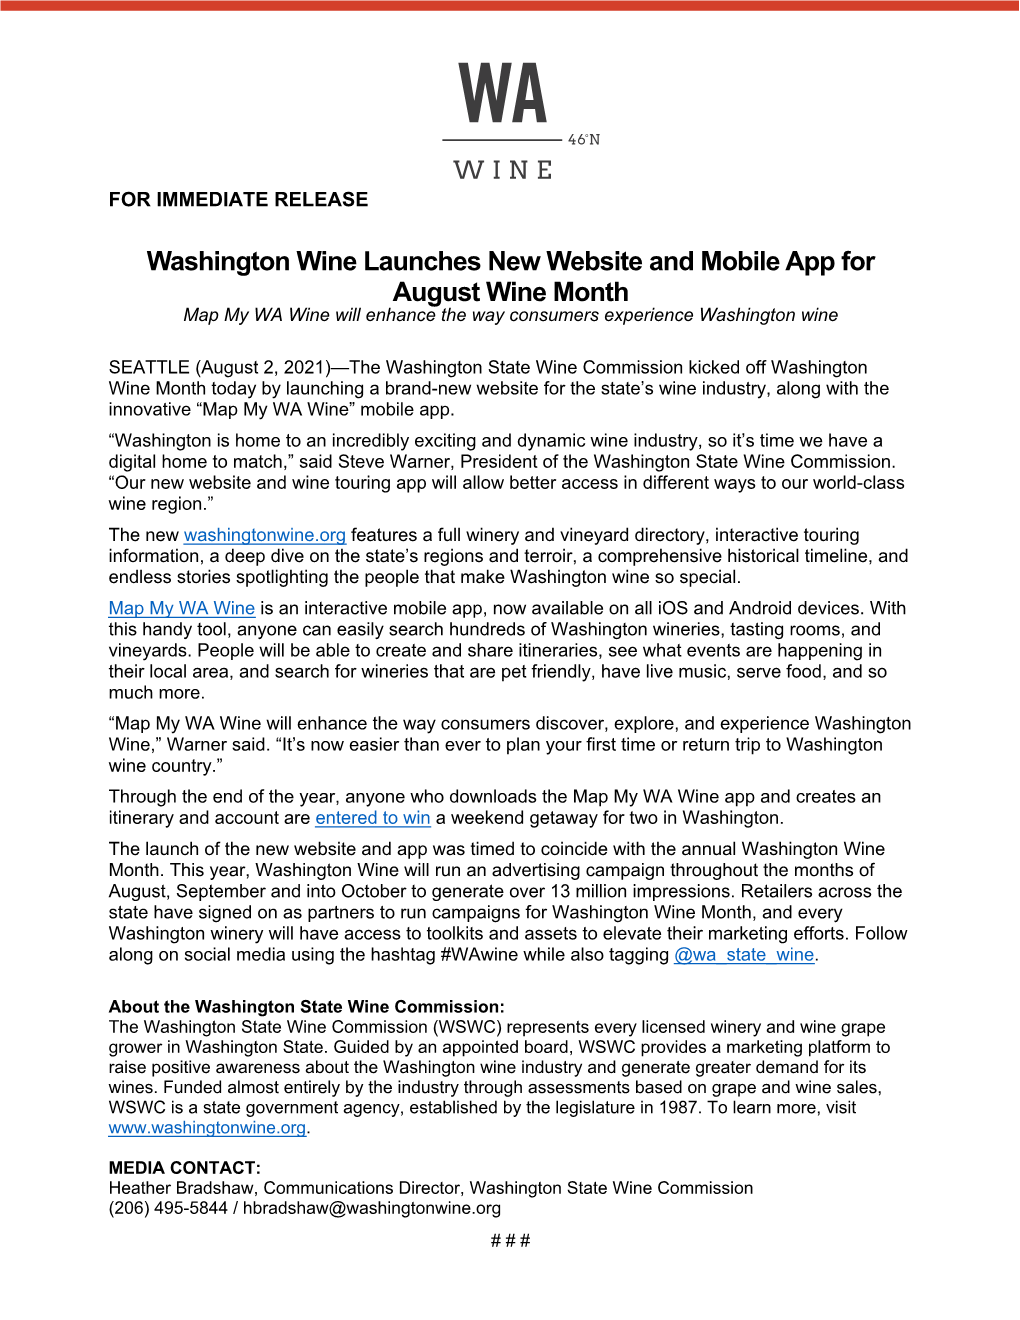 Washington Wine Launches New Website and Mobile App for August Wine Month Map My WA Wine Will Enhance the Way Consumers Experience Washington Wine